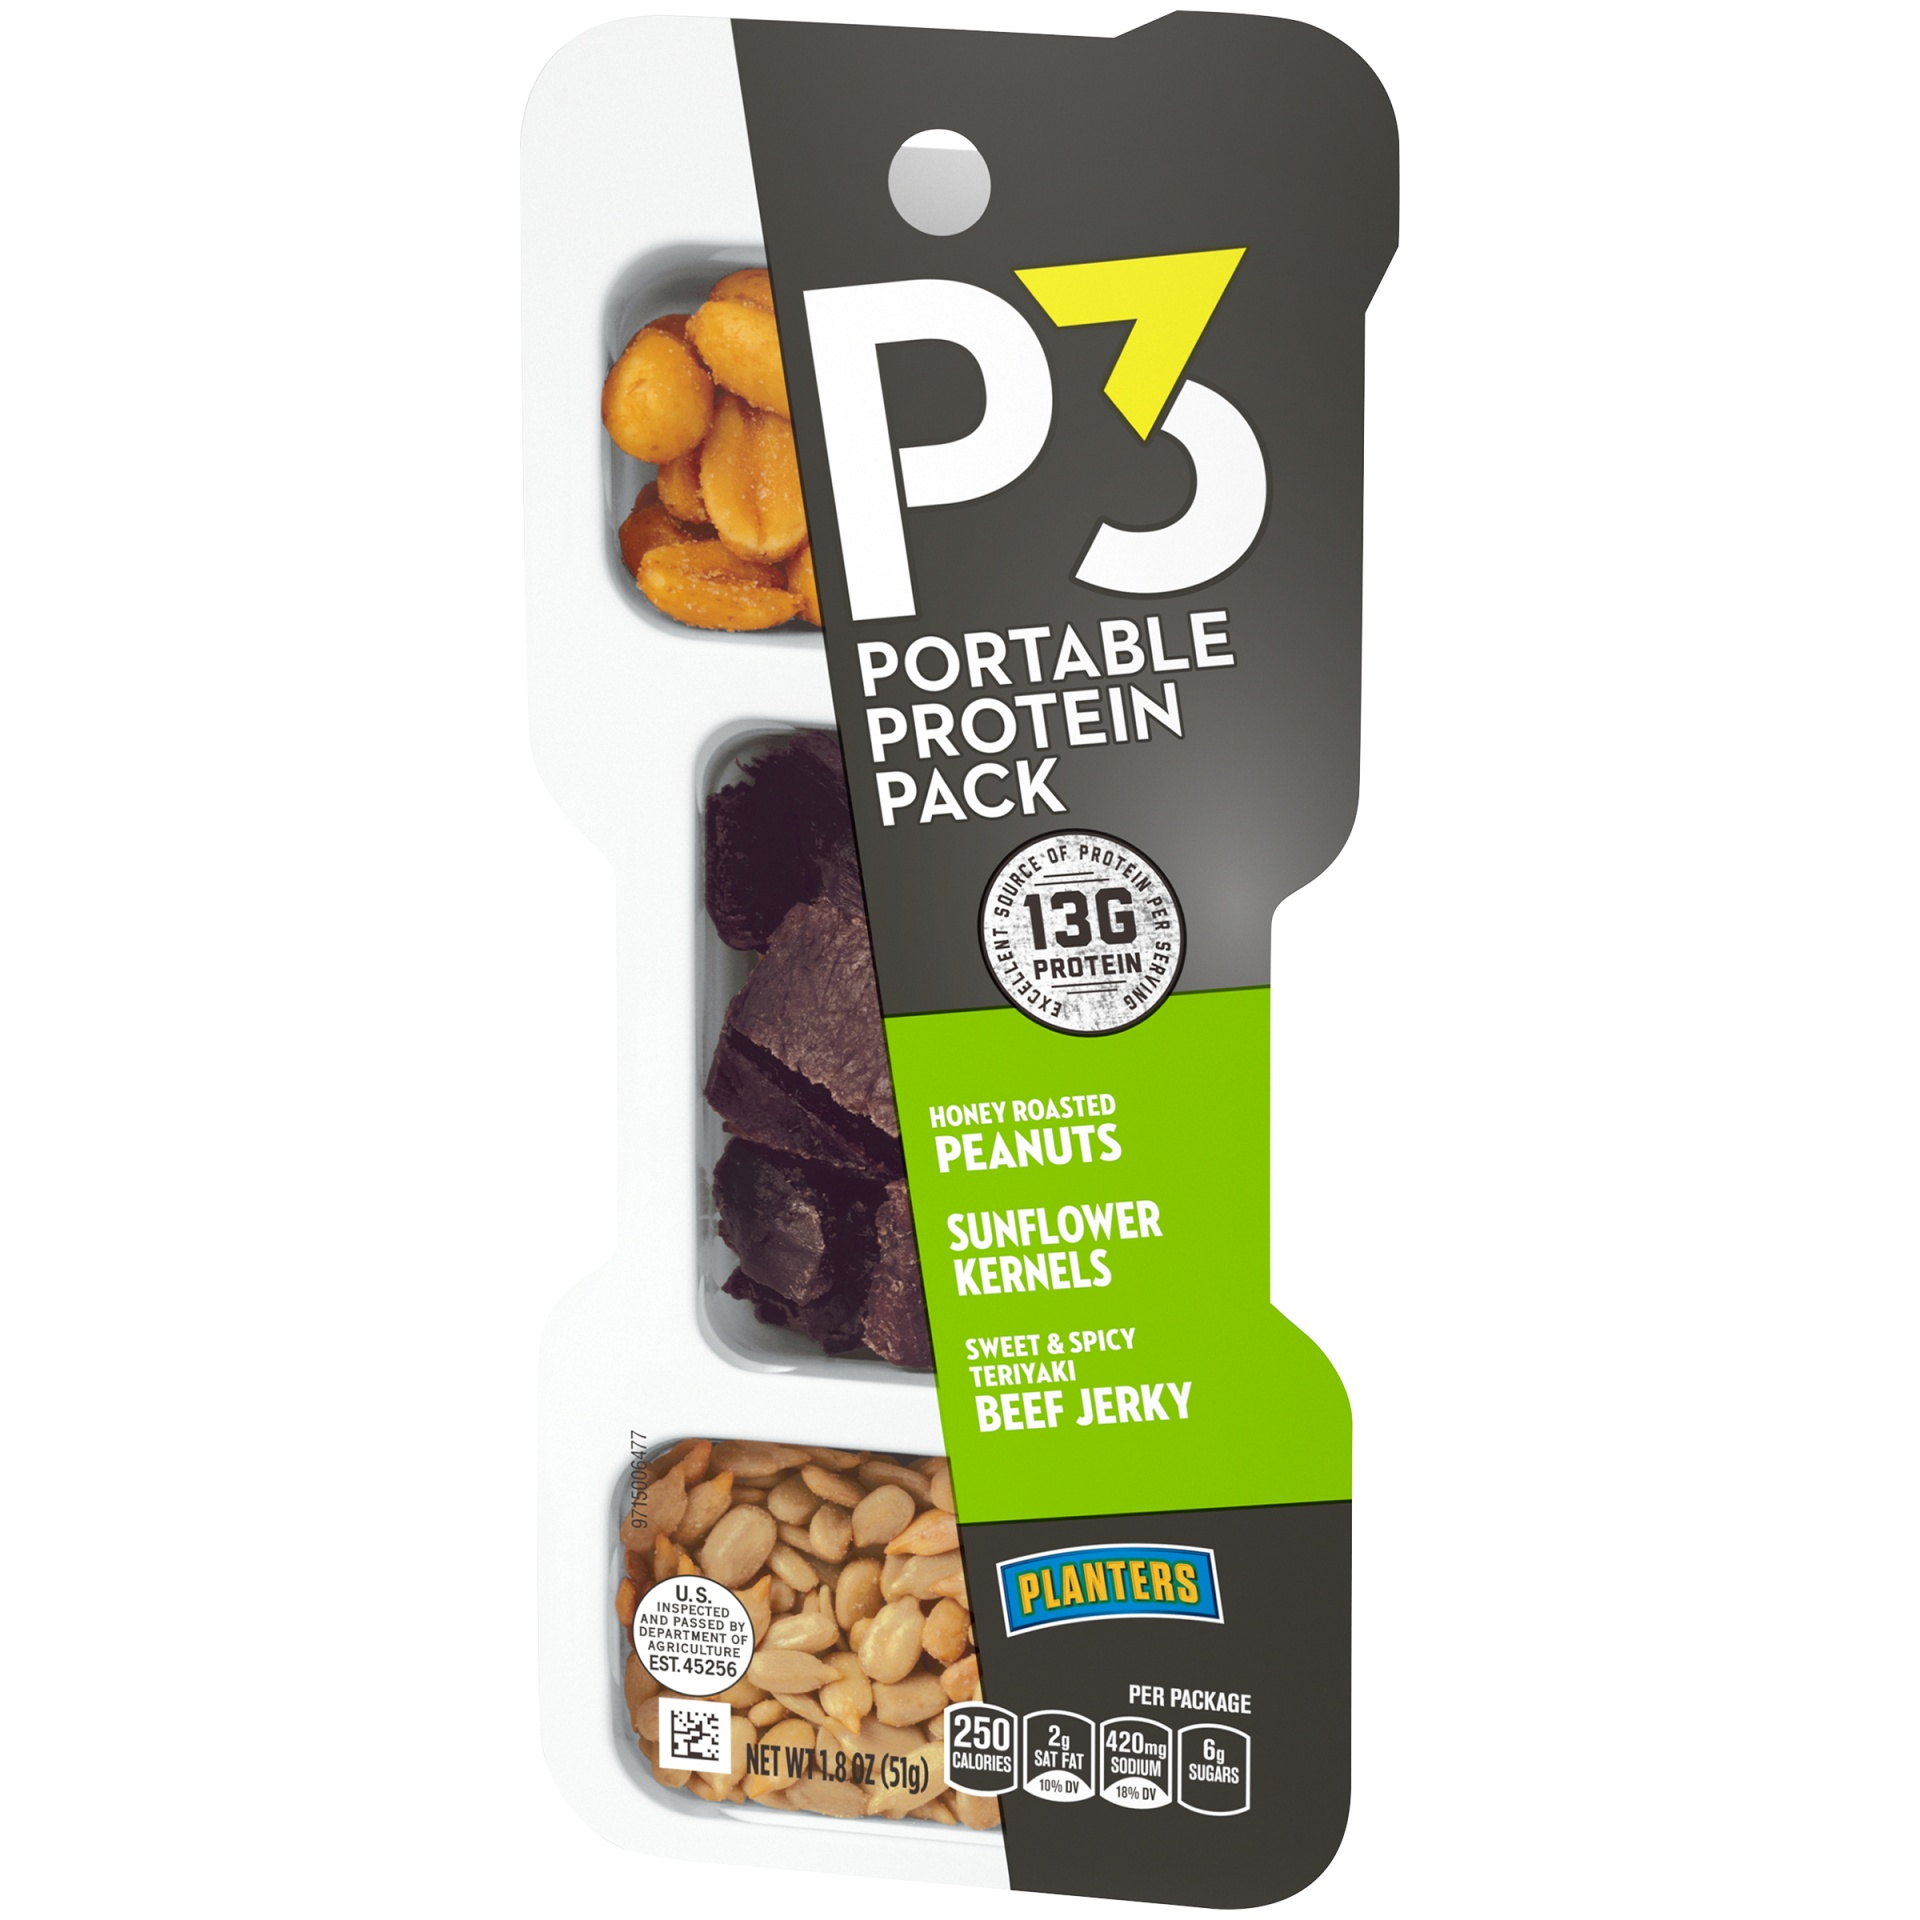 slide 3 of 6, P3 Portable Protein Snack Pack with Honey Roasted Peanuts, Sunflower Kernels & Teriyaki Beef Jerky Tray, 1.8 oz